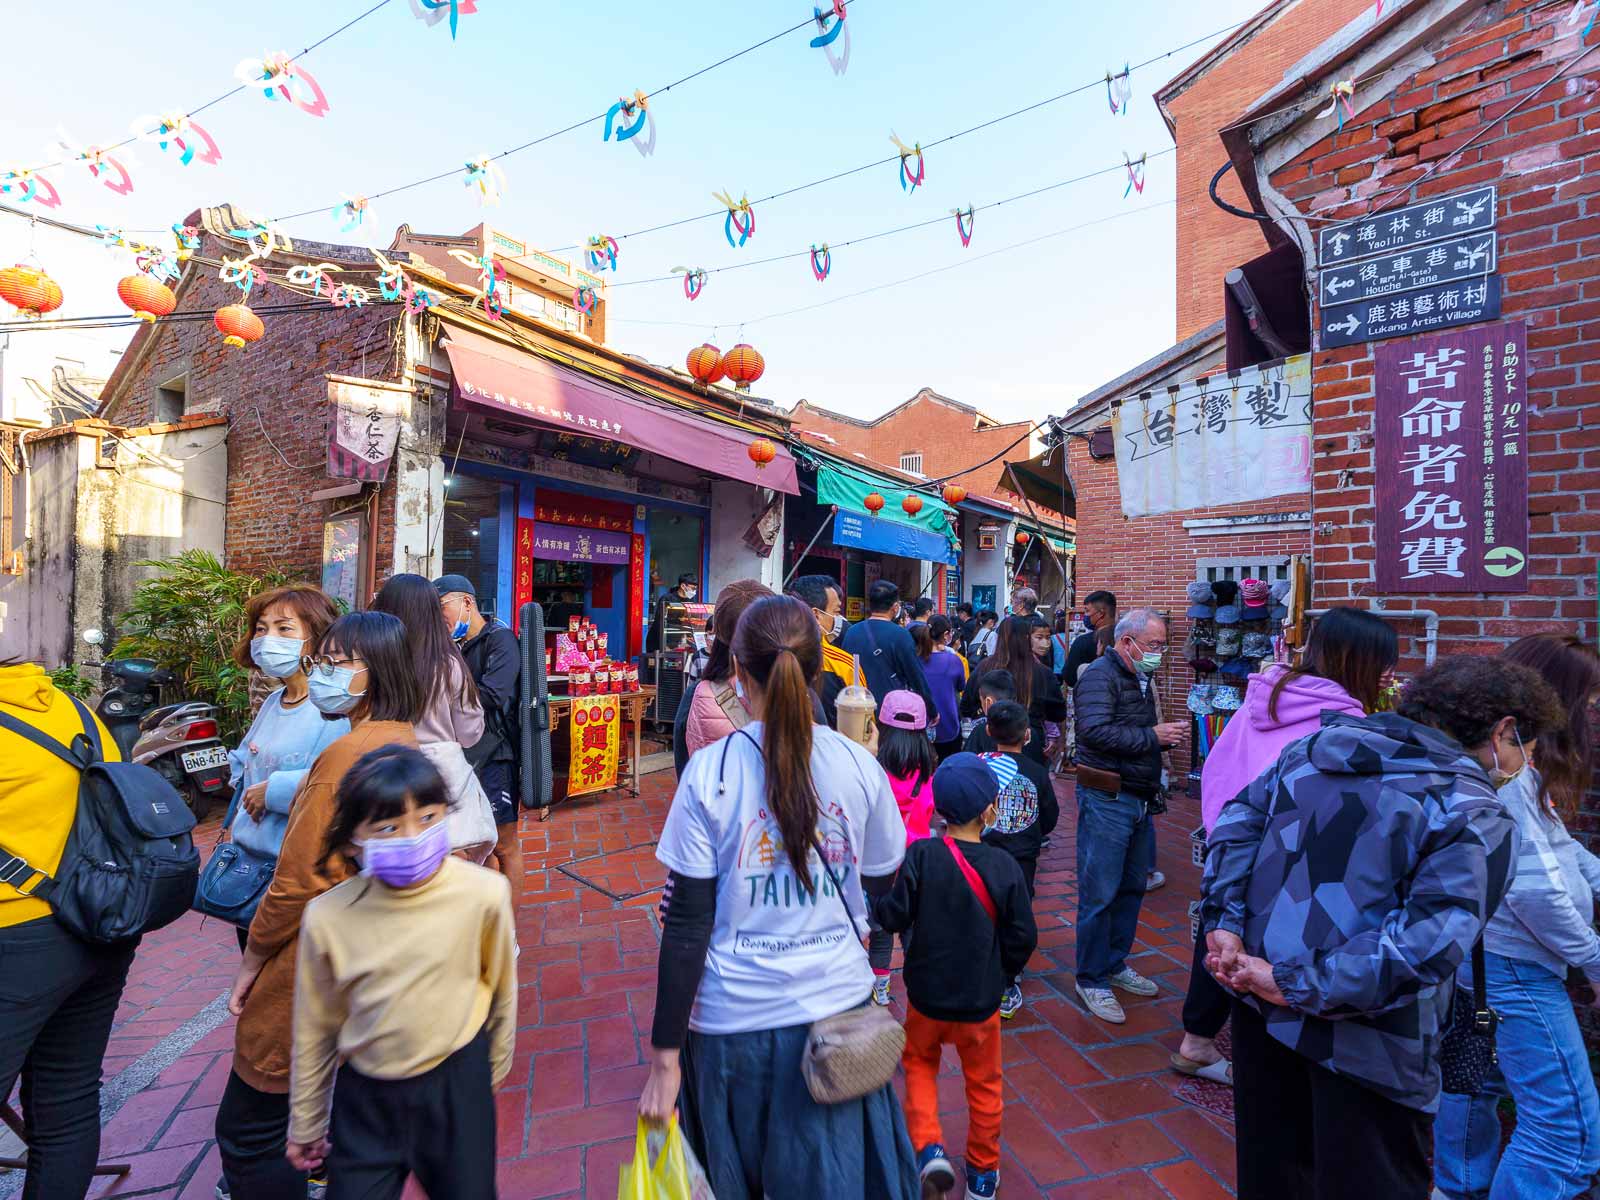 Tourists of all ages walk around Lukang Old Street.